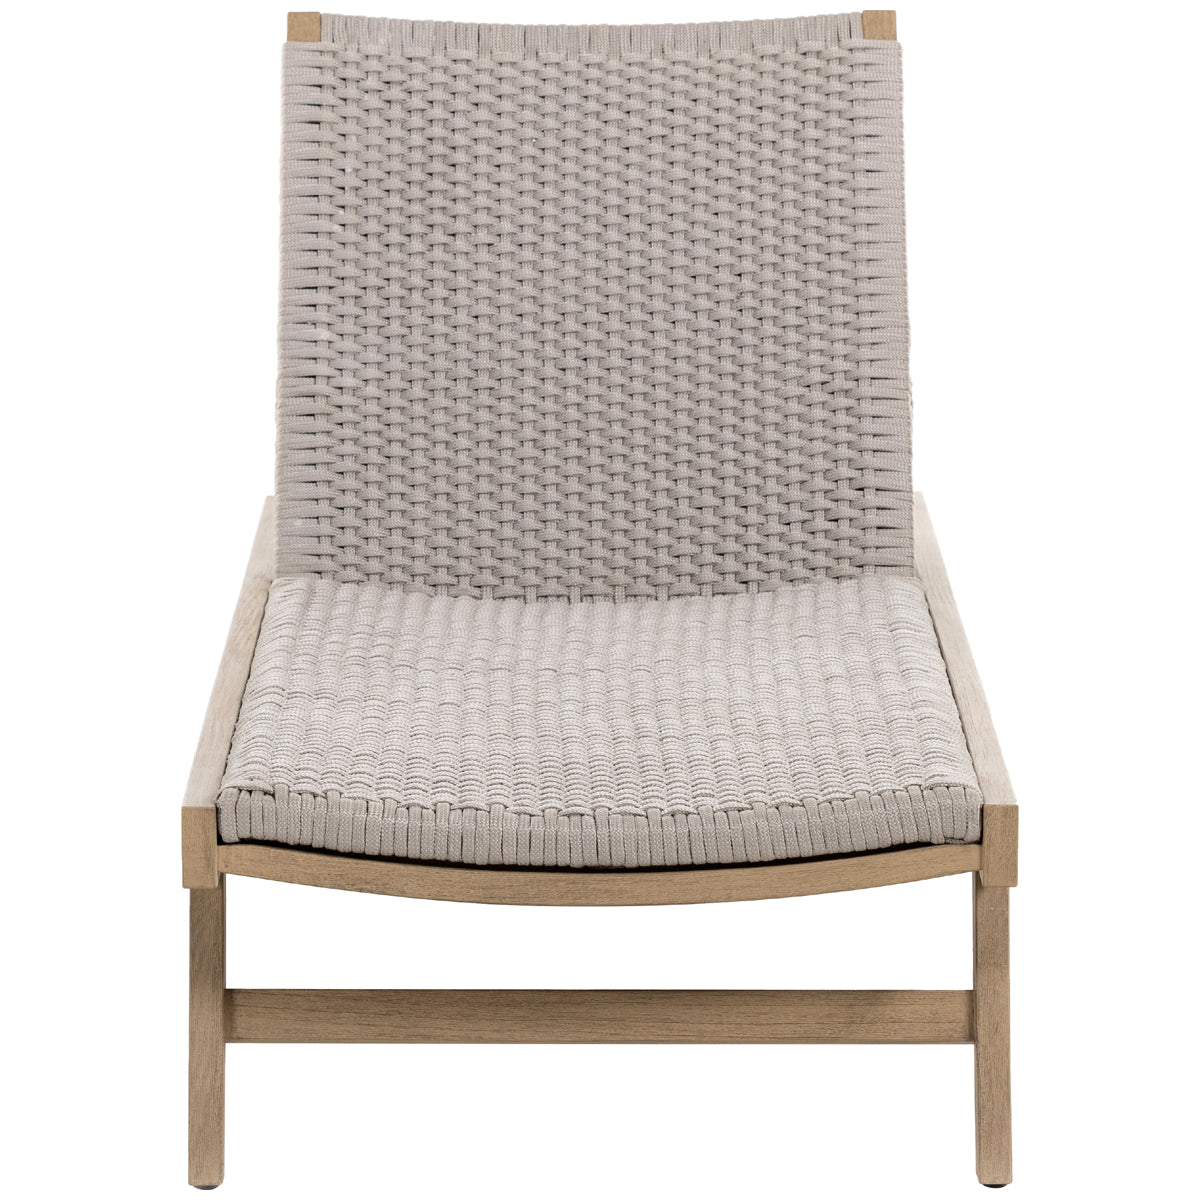 Four Hands Solano Delano Outdoor Chaise